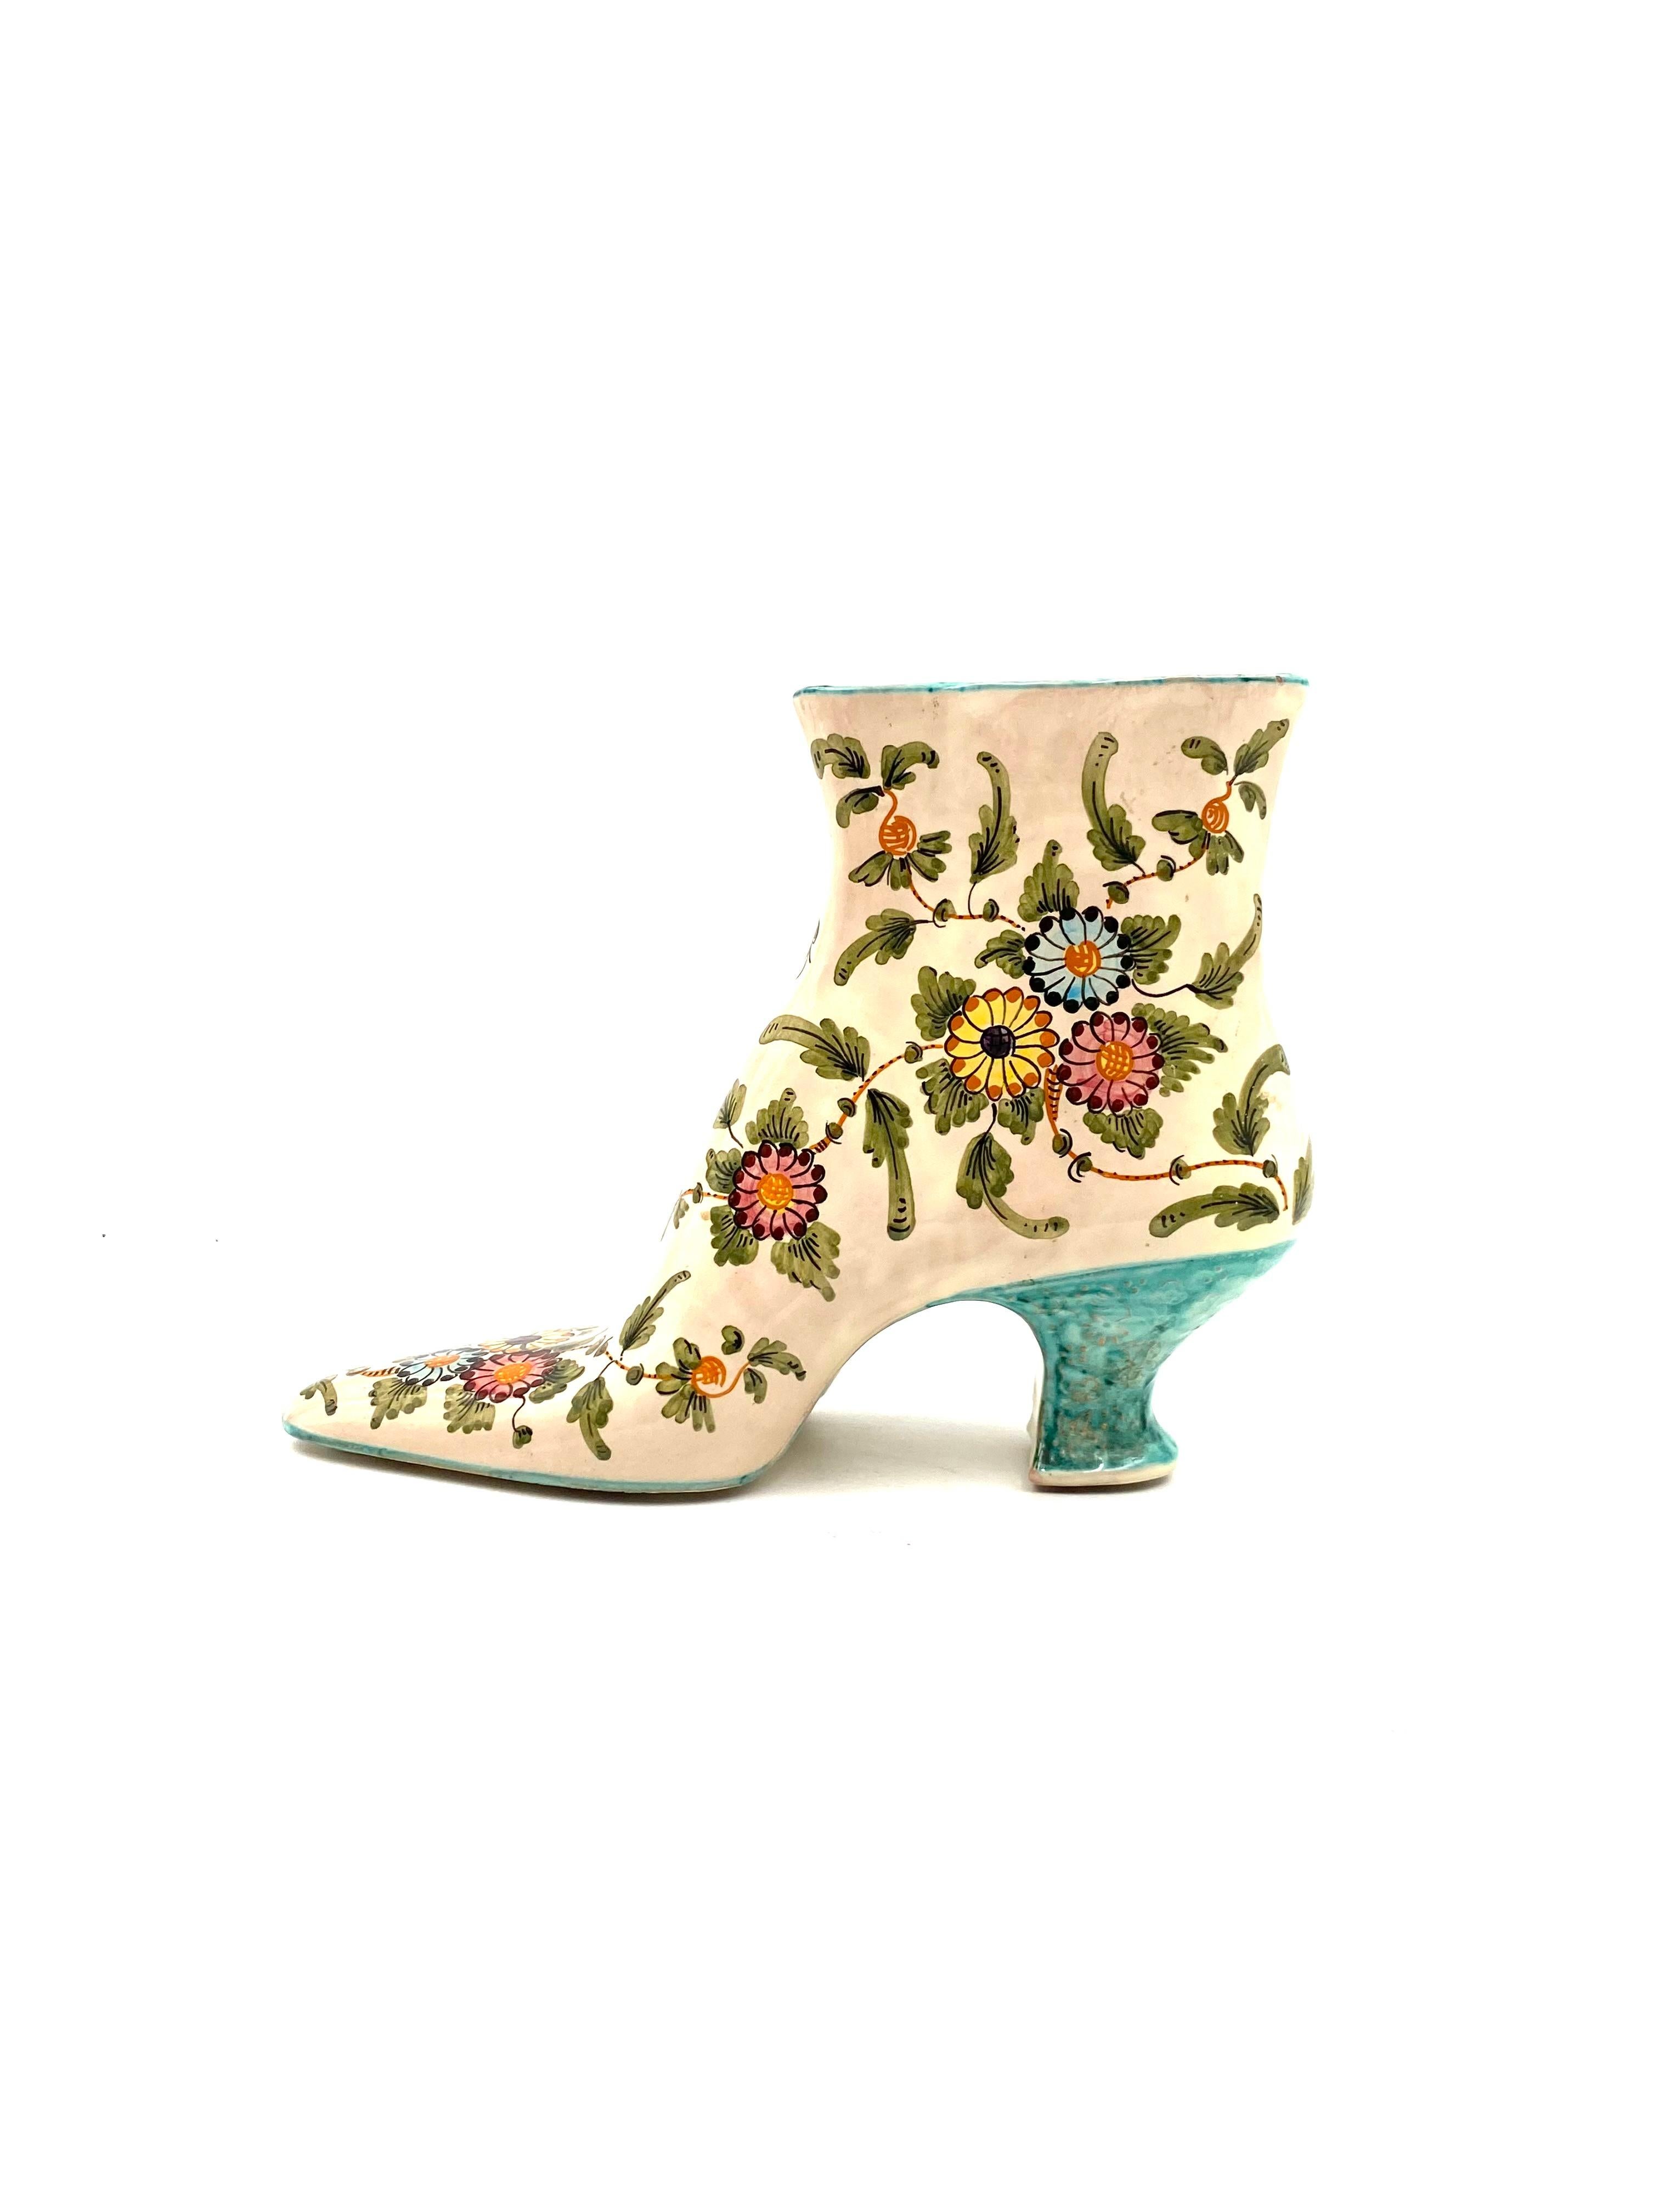 “Stivaletto” Ceramic sculpture

Manifattura Minghetti, Bologna Italy, 1950s

Decorated with “Tacchiolo” pattern on a cream ground, heel with floral decoration in relief

Marked 'Minghetti/Bologna/Italy' on the base.

Measures : H 19 cm

27